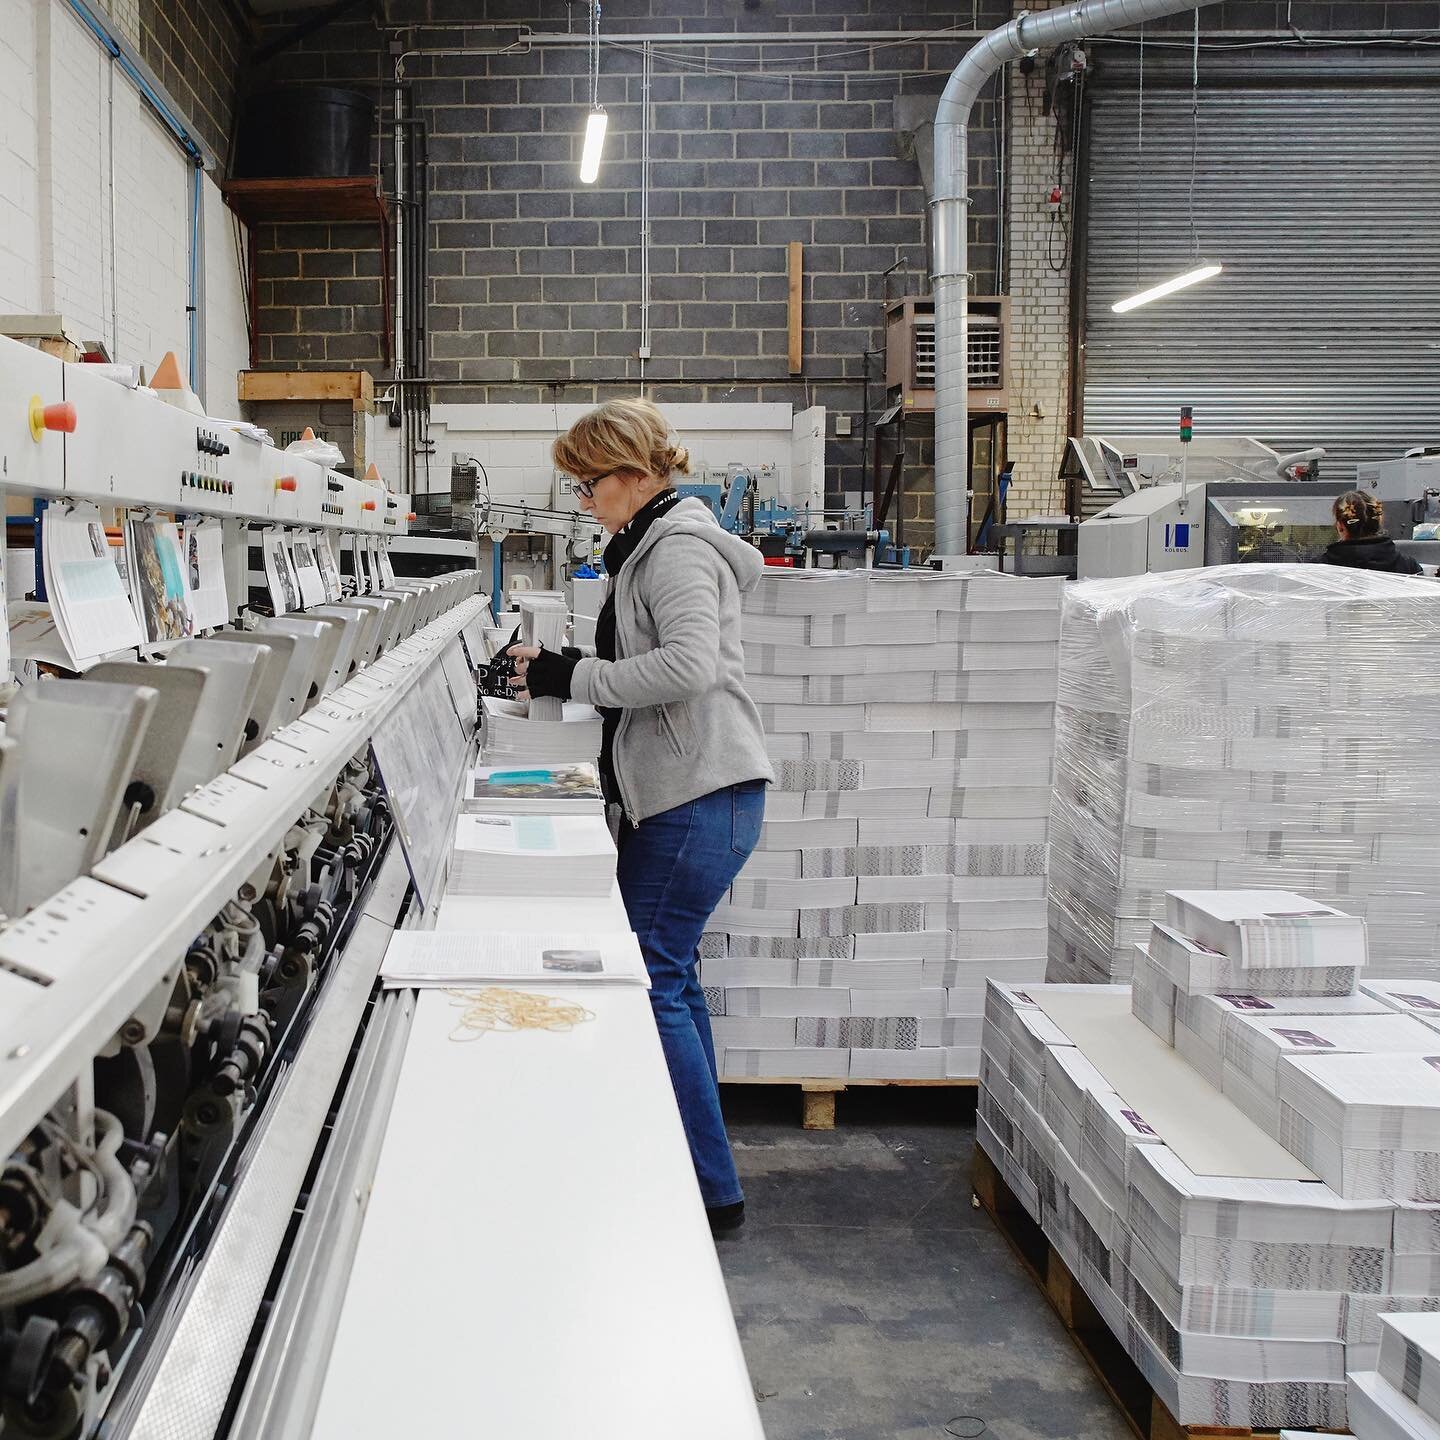 Making books at Empress Litho in Woolwich. The 24-strong team typically process around 2.5 million sheets per month, and their capability includes producing stapled, perfect-bound or sewn soft- and hardback books in all shapes and sizes. The image is